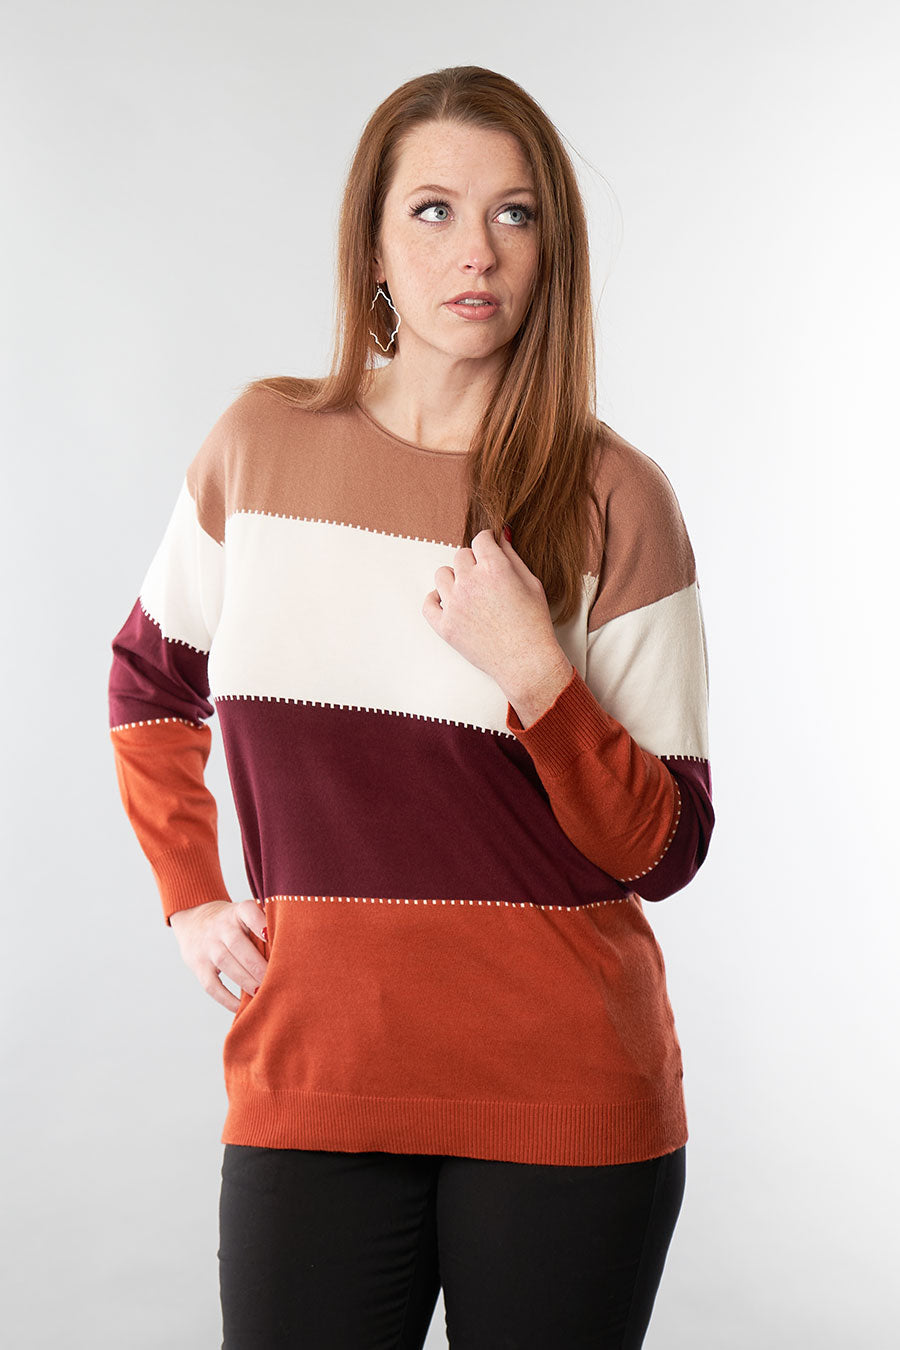 Fully Capable Long Sleeve Top Front